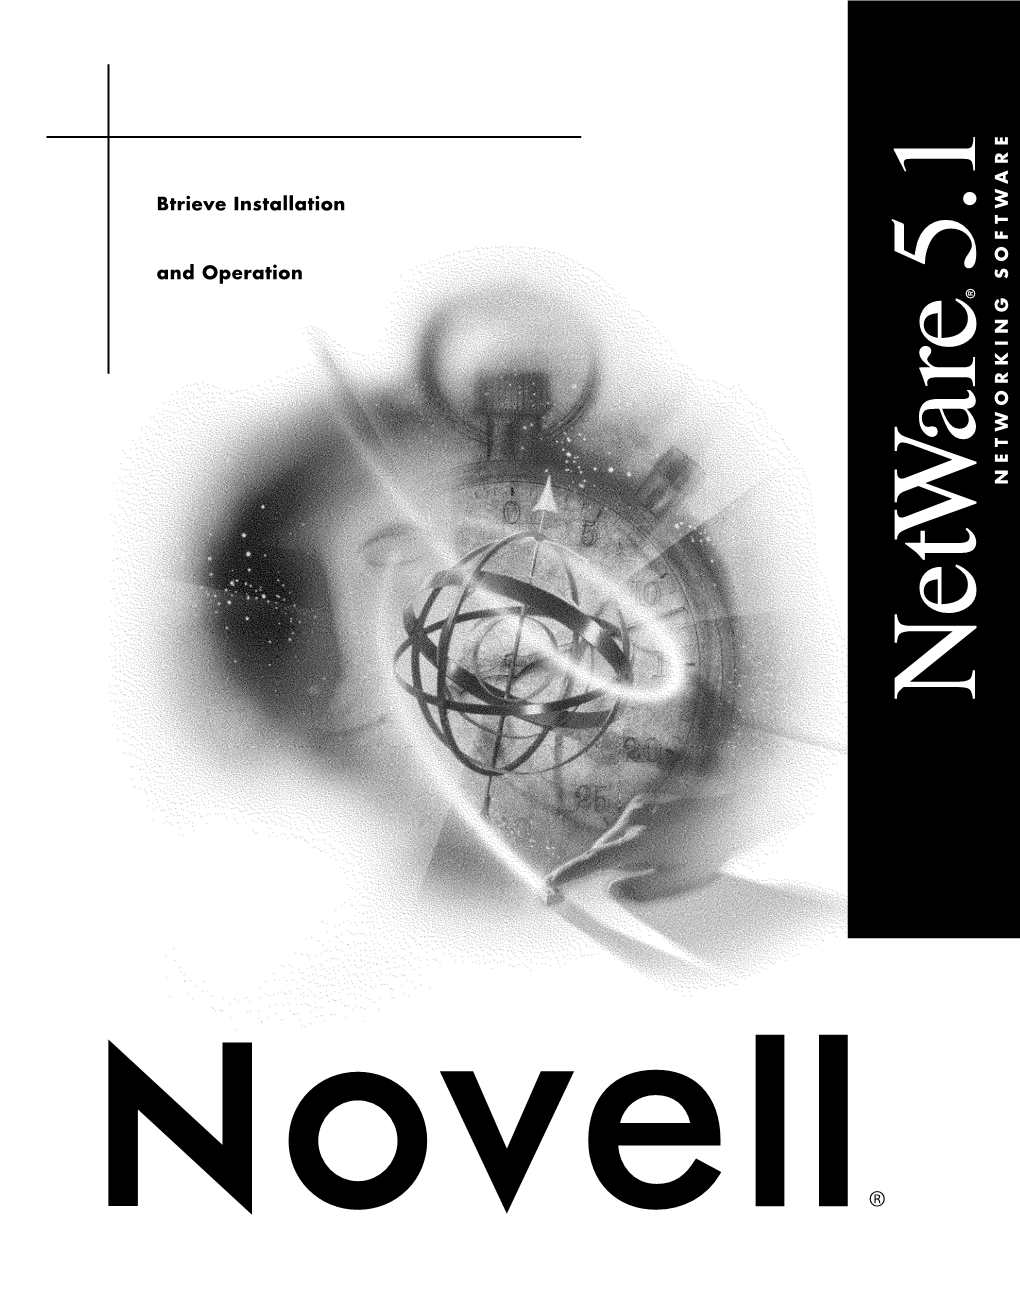 Registering Netware Btrieve with the Novell Directory Services